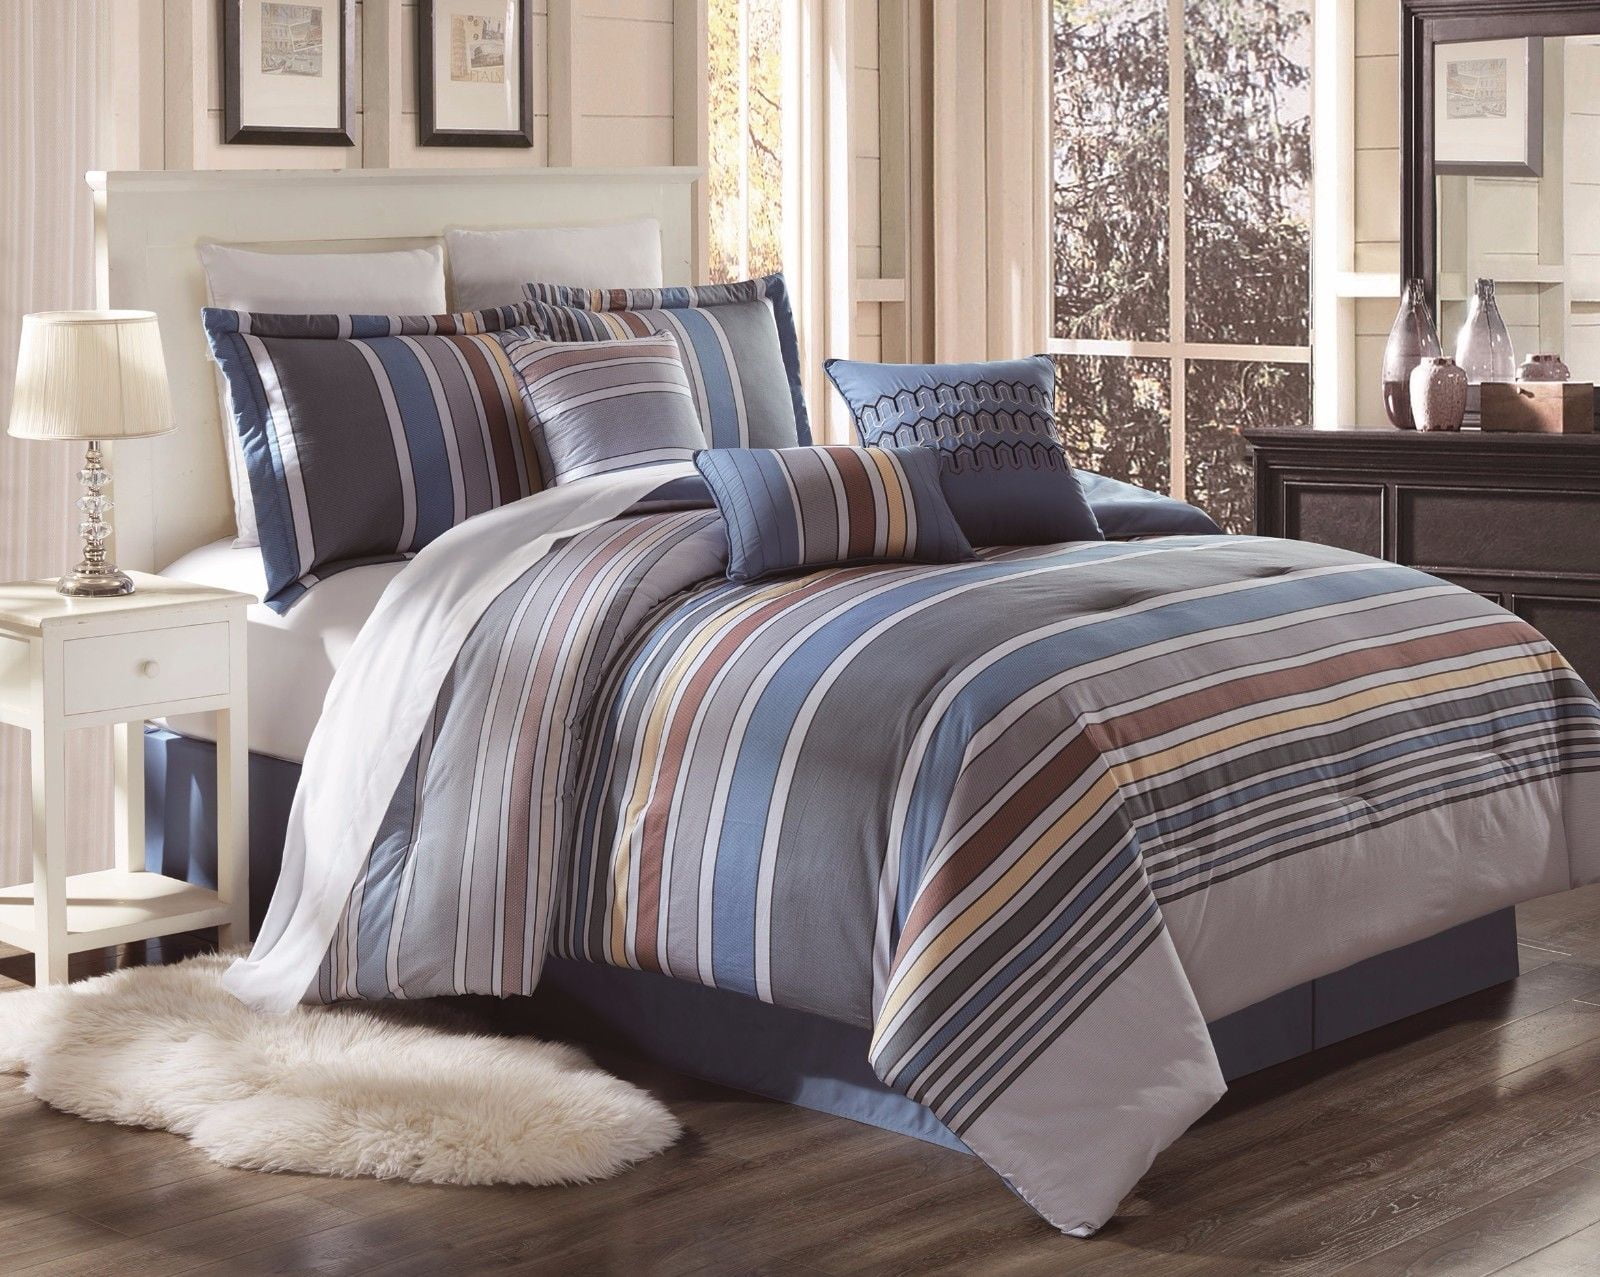 B-Y332 3-Piece Striped Pattern Queen Cotton Duvet Cover Bed Set For